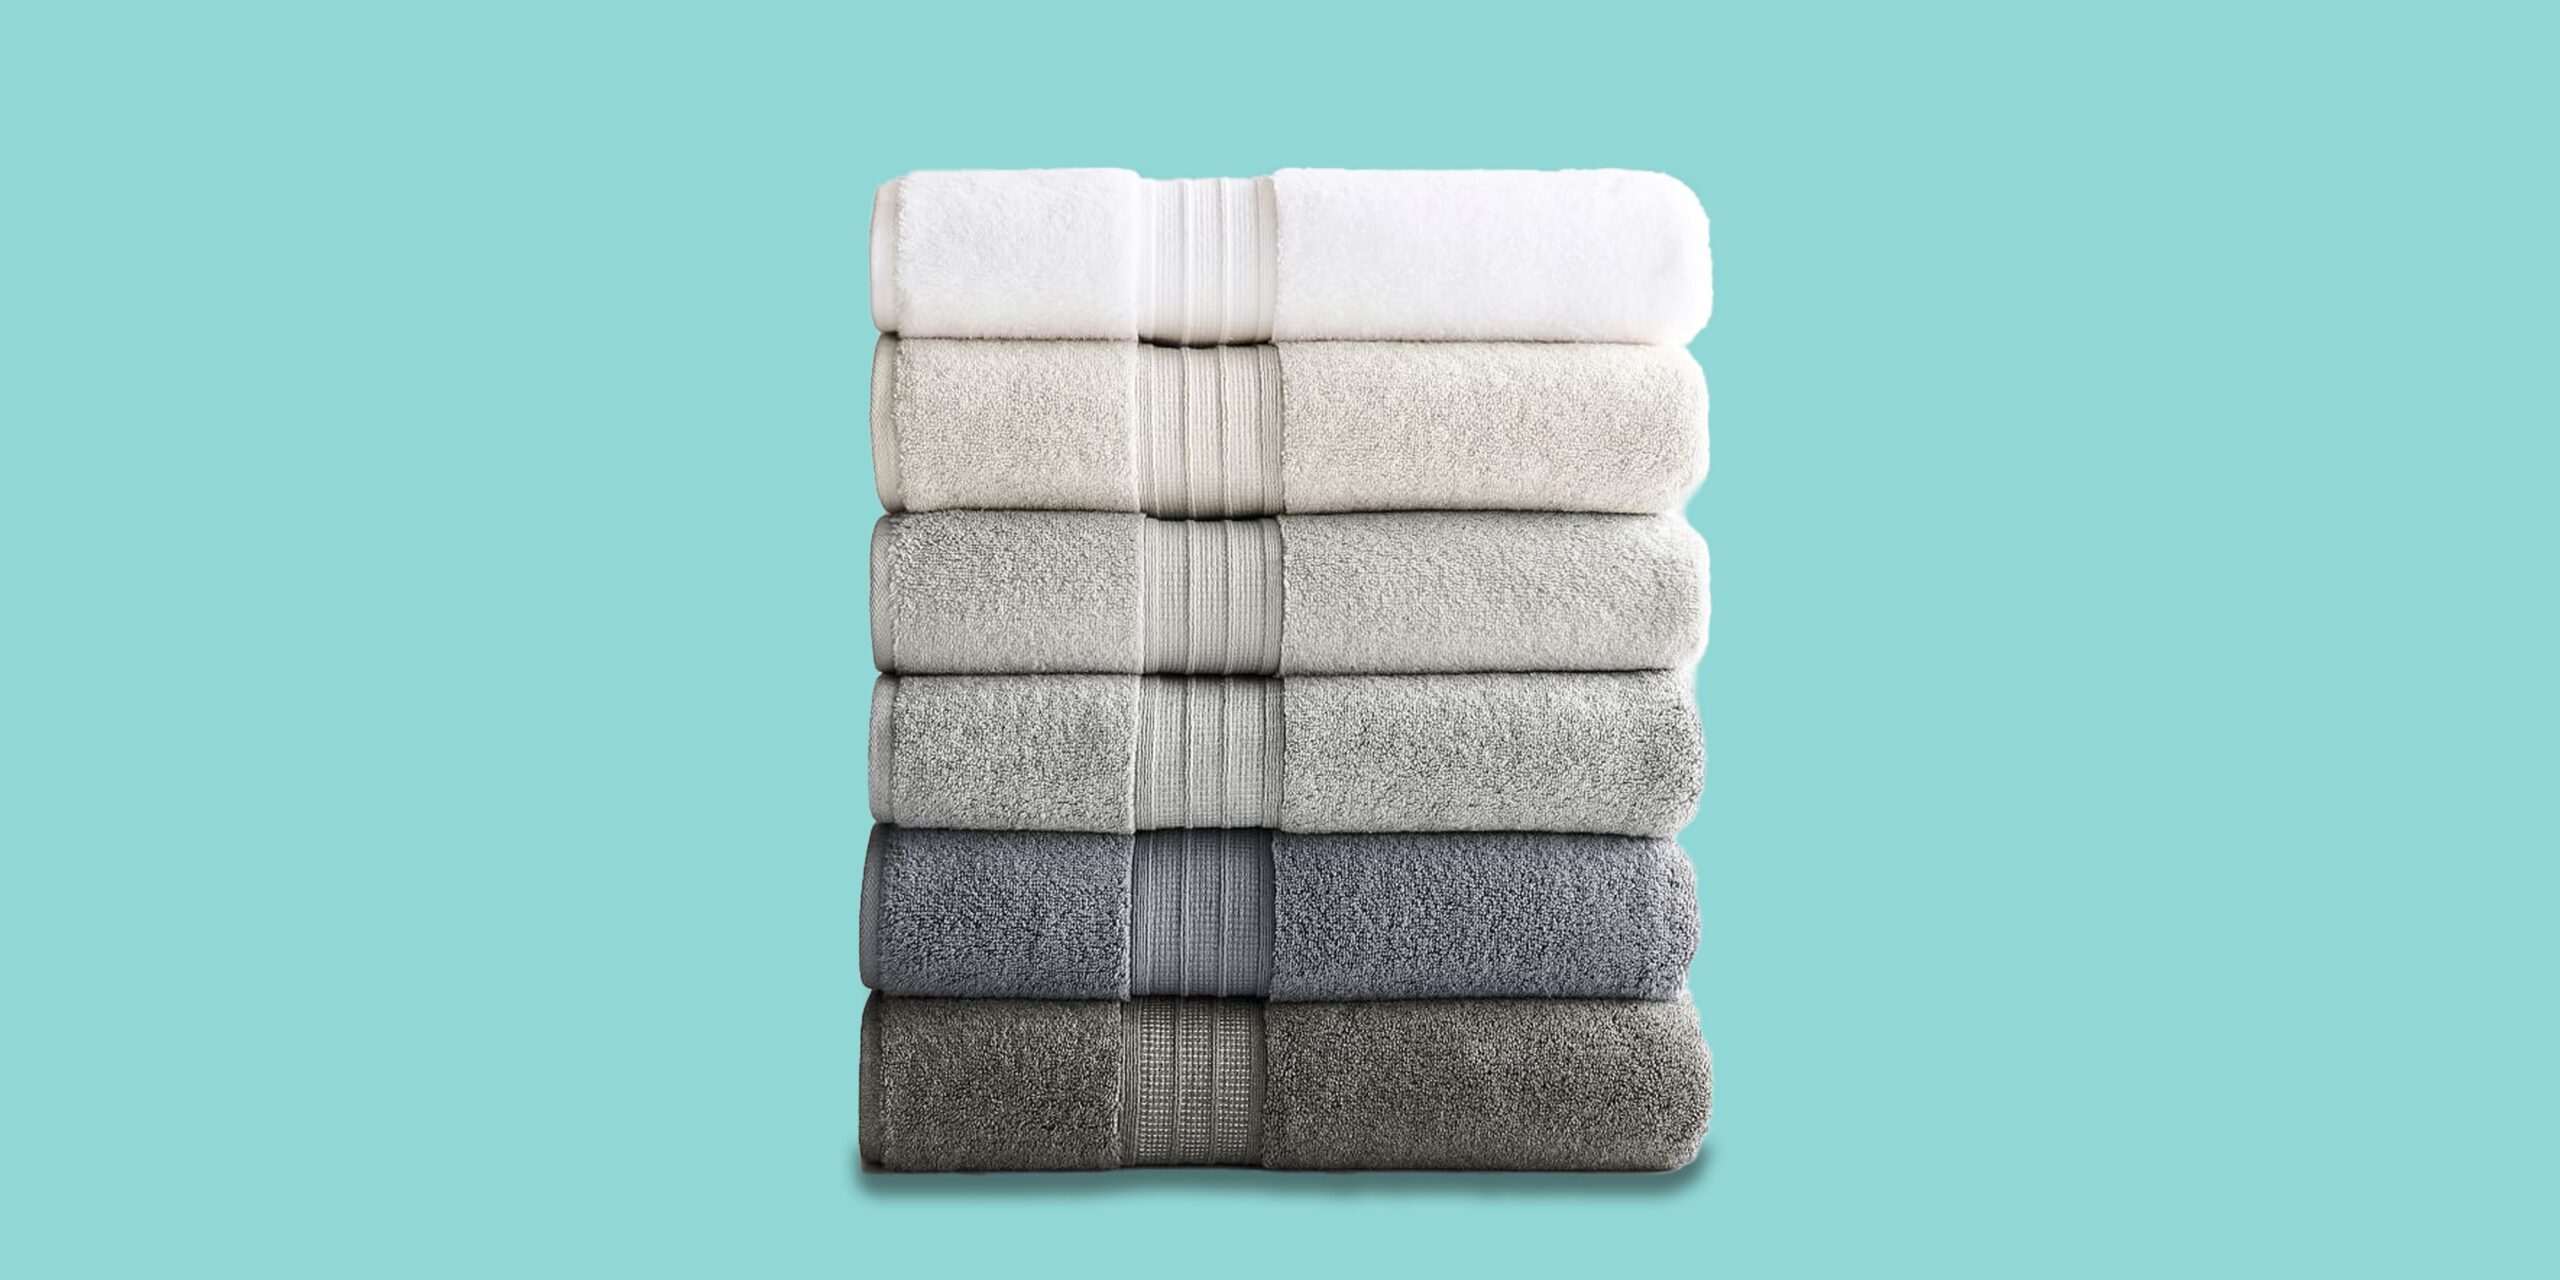 How to find and choose the ideal bath towels for you?